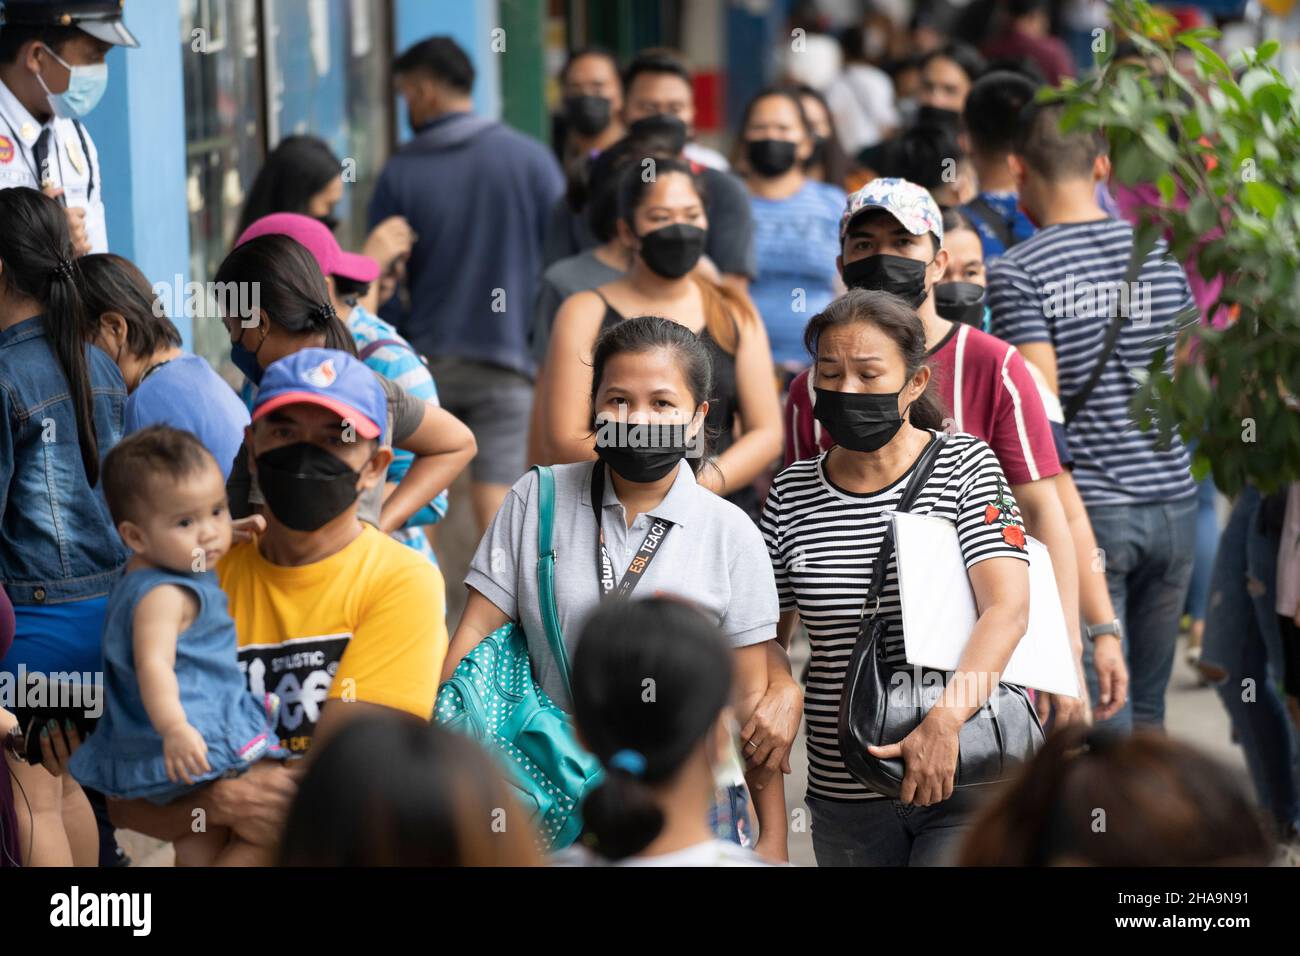 People in the Philippines walking along a street wearing face masks, the wearing of face masks in public places and establishments is mandatory. Stock Photo